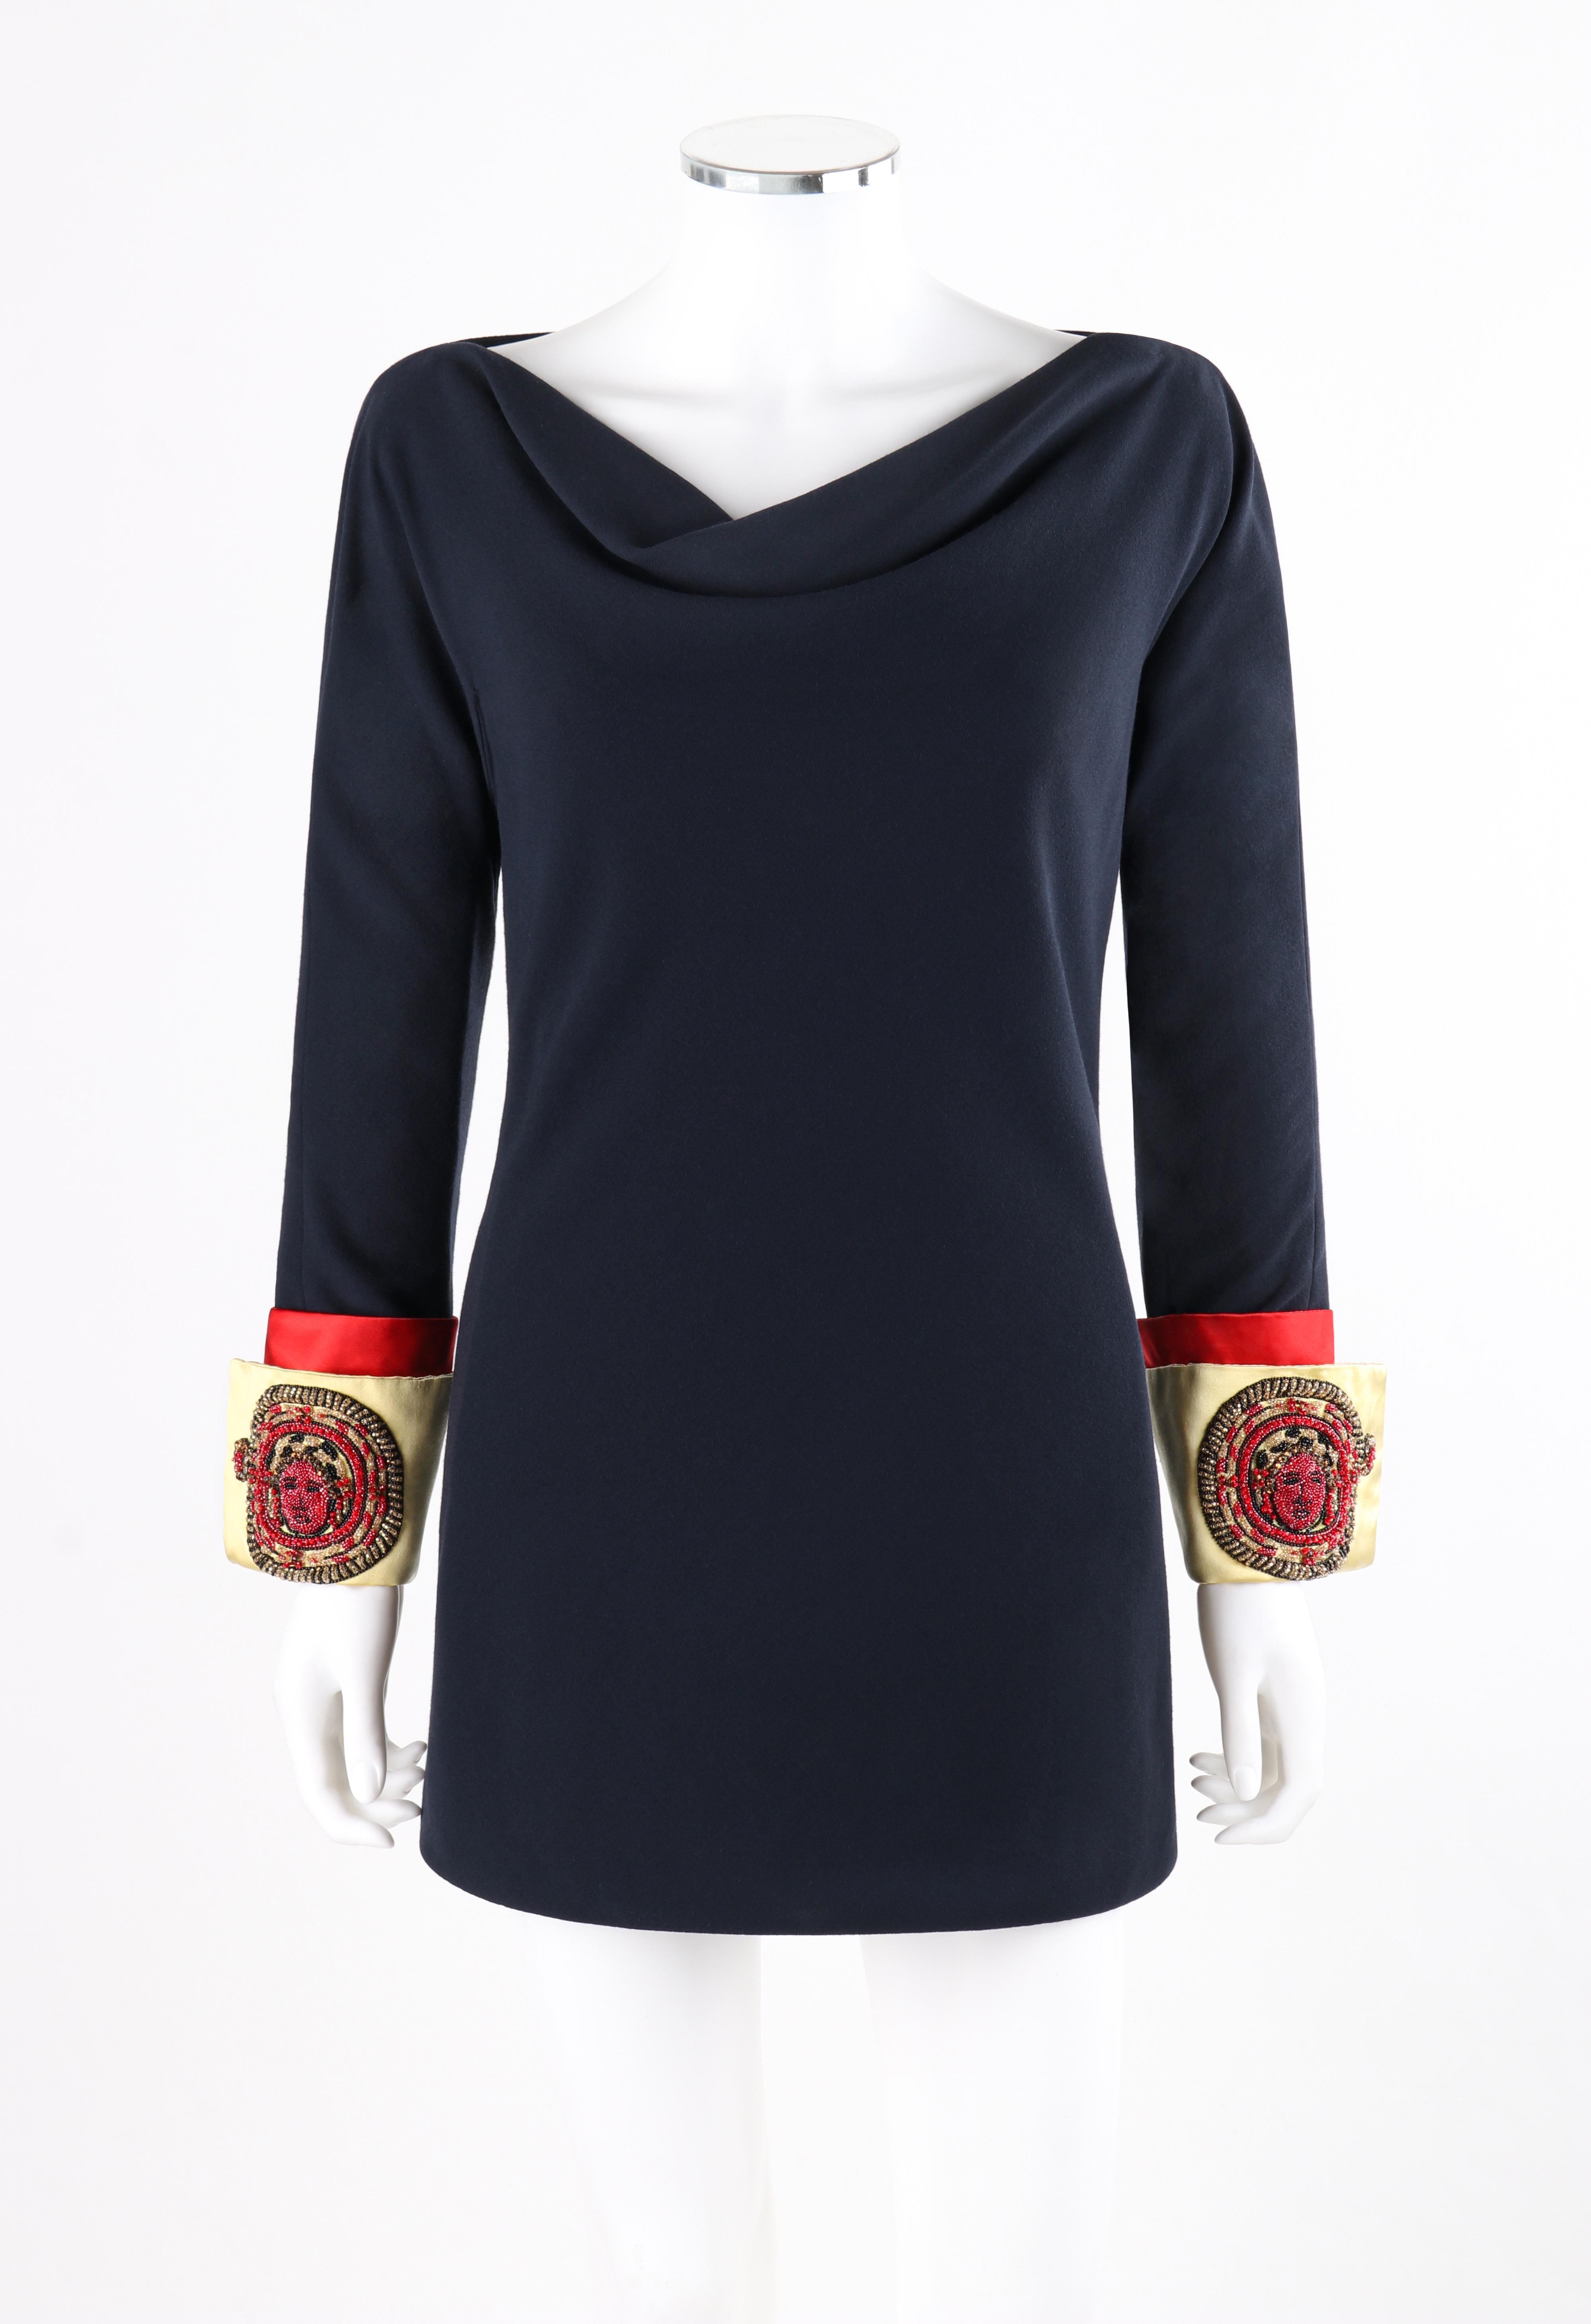 ATELIER VERSACE S/S 1990 Mini Navy Embellished Medusa Cuff Sleeve Tunic Dress

Brand / Manufacturer: Atelier Versace
Collection: S/S 1990
Designer: Gianni Versace
Style: Mini tunic dress with cowl neckline. 
Color(s): Shades of blue, red, yellow and